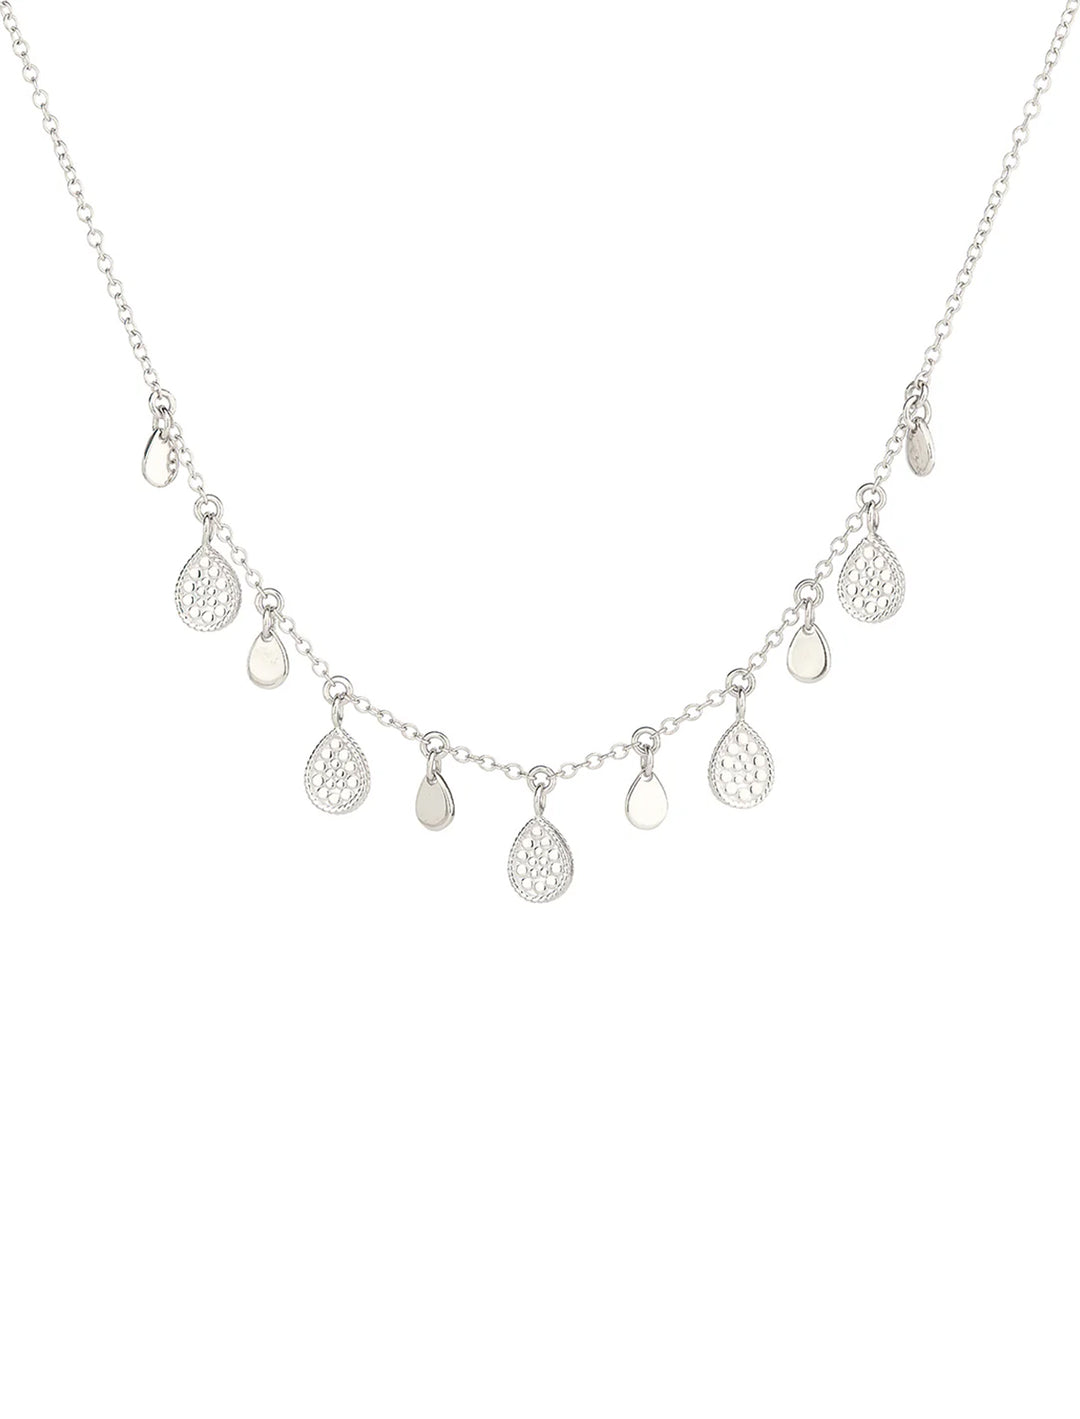 Front view of Anna Beck's teardrop charm necklace in silver.